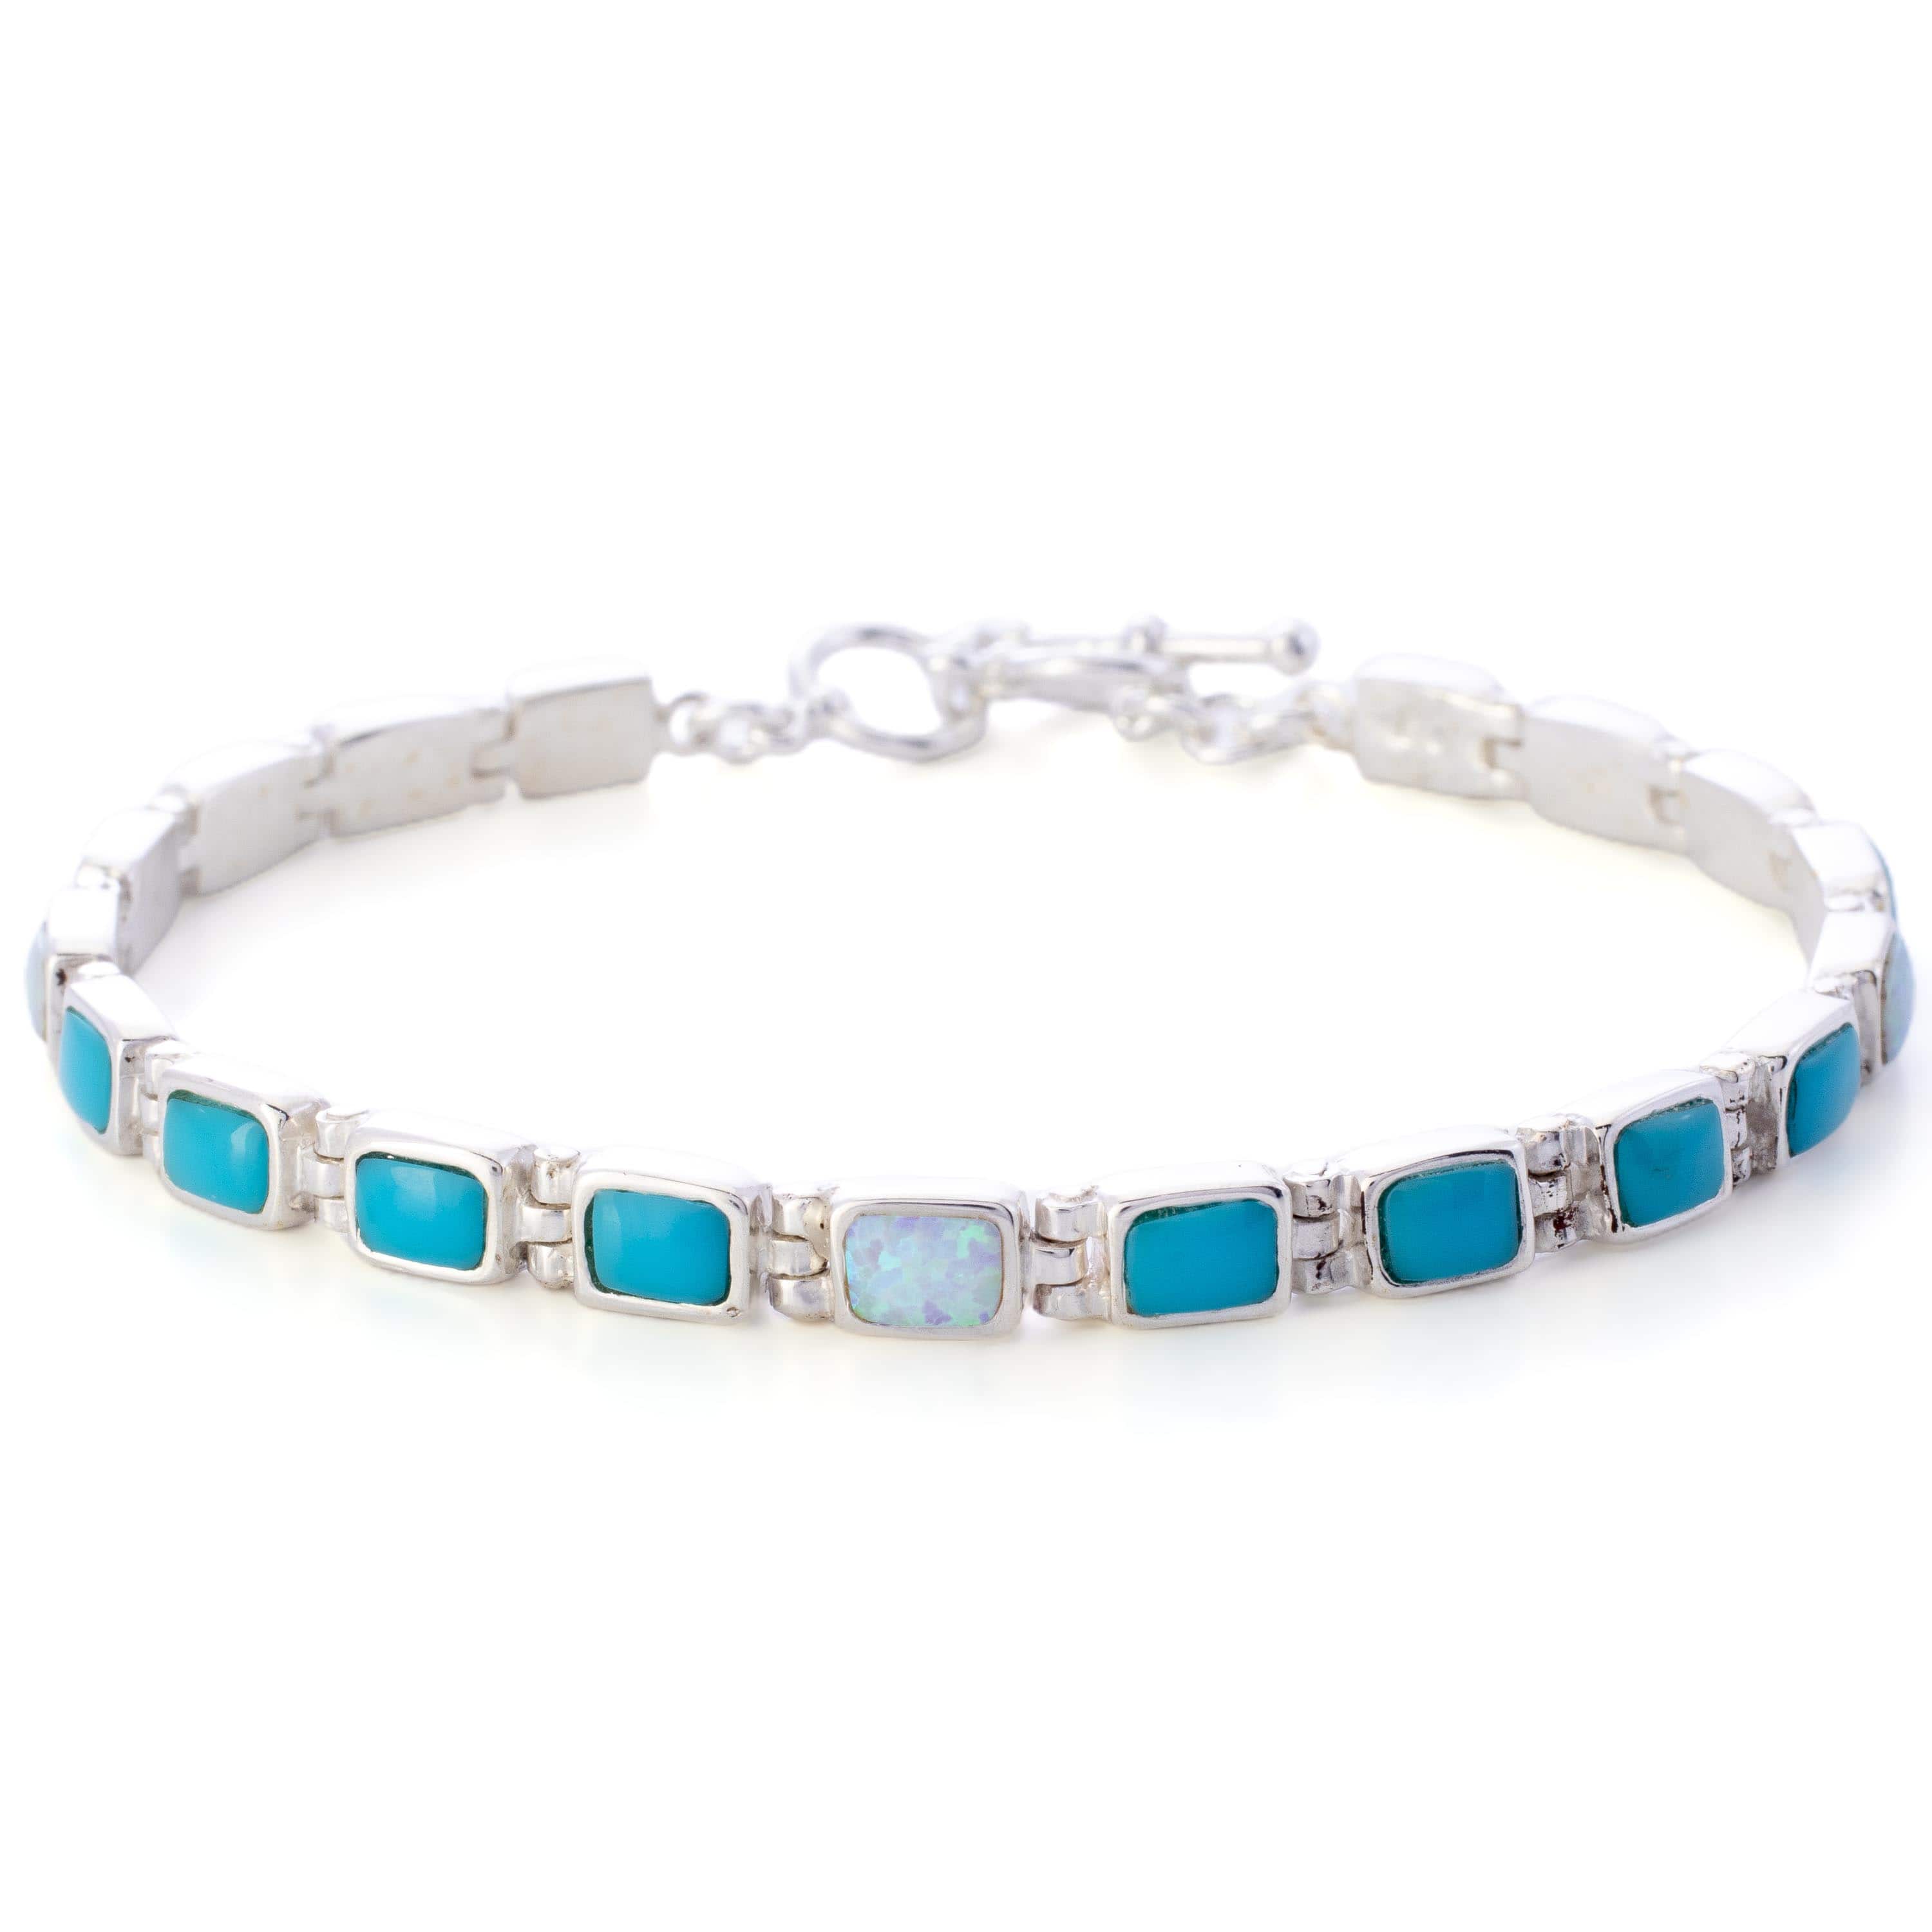 Kalifano Southwest Silver Jewelry Turquoise 925 Sterling Silver Bracelet USA Handmade with Opal Accent NMB.0207.TQ